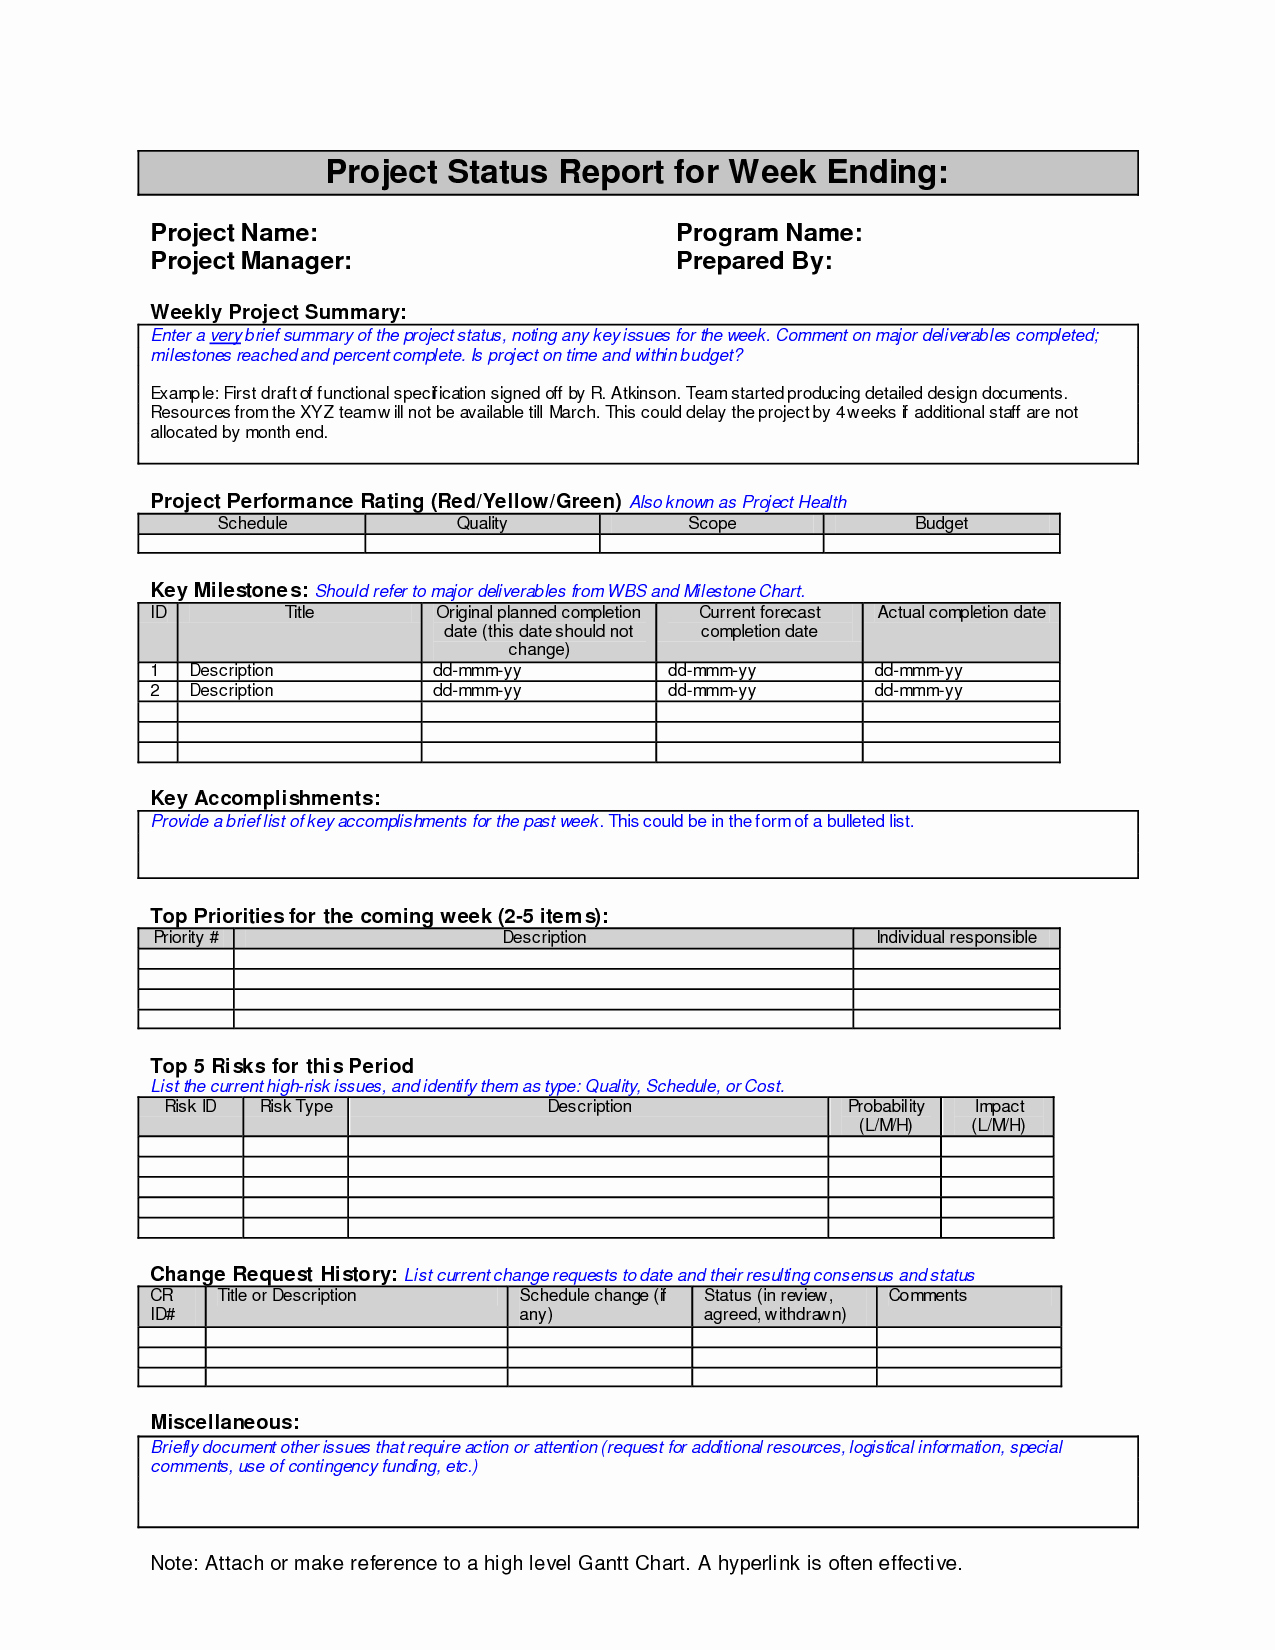 Monthly Progress Report Template Unique Weekly Project Status Report Sample Google Search